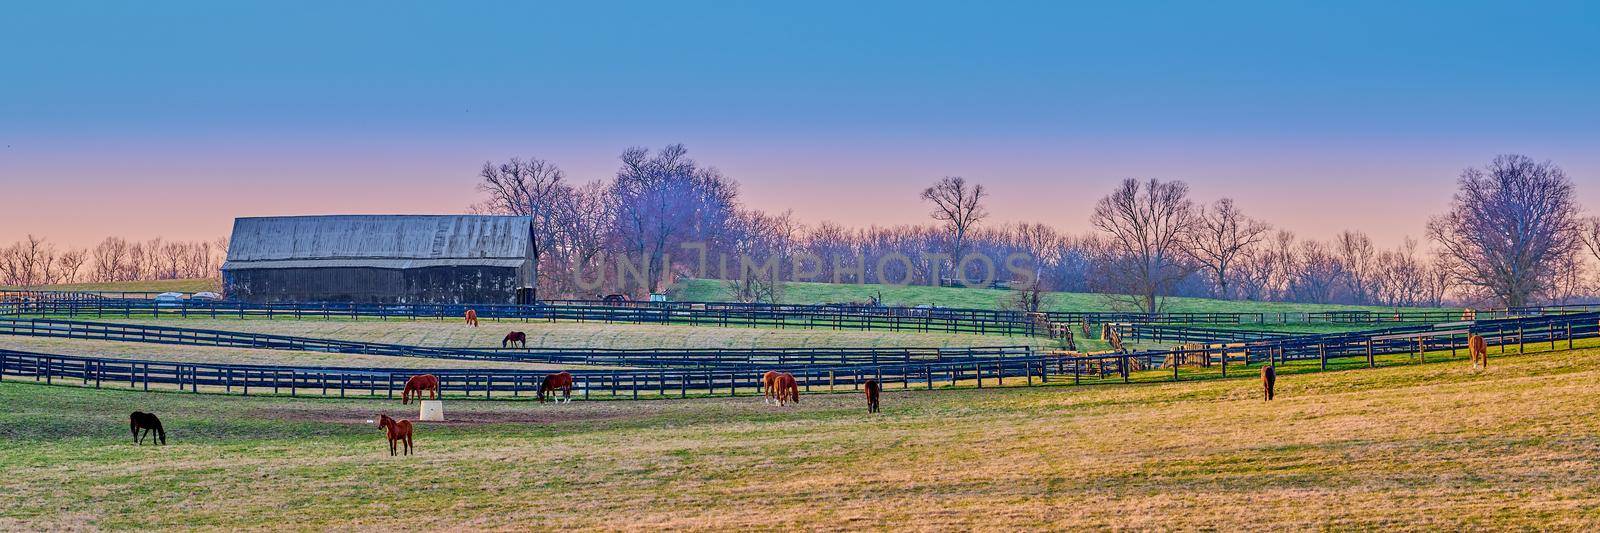 Horses grazing on a farm at dusk. by patrickstock